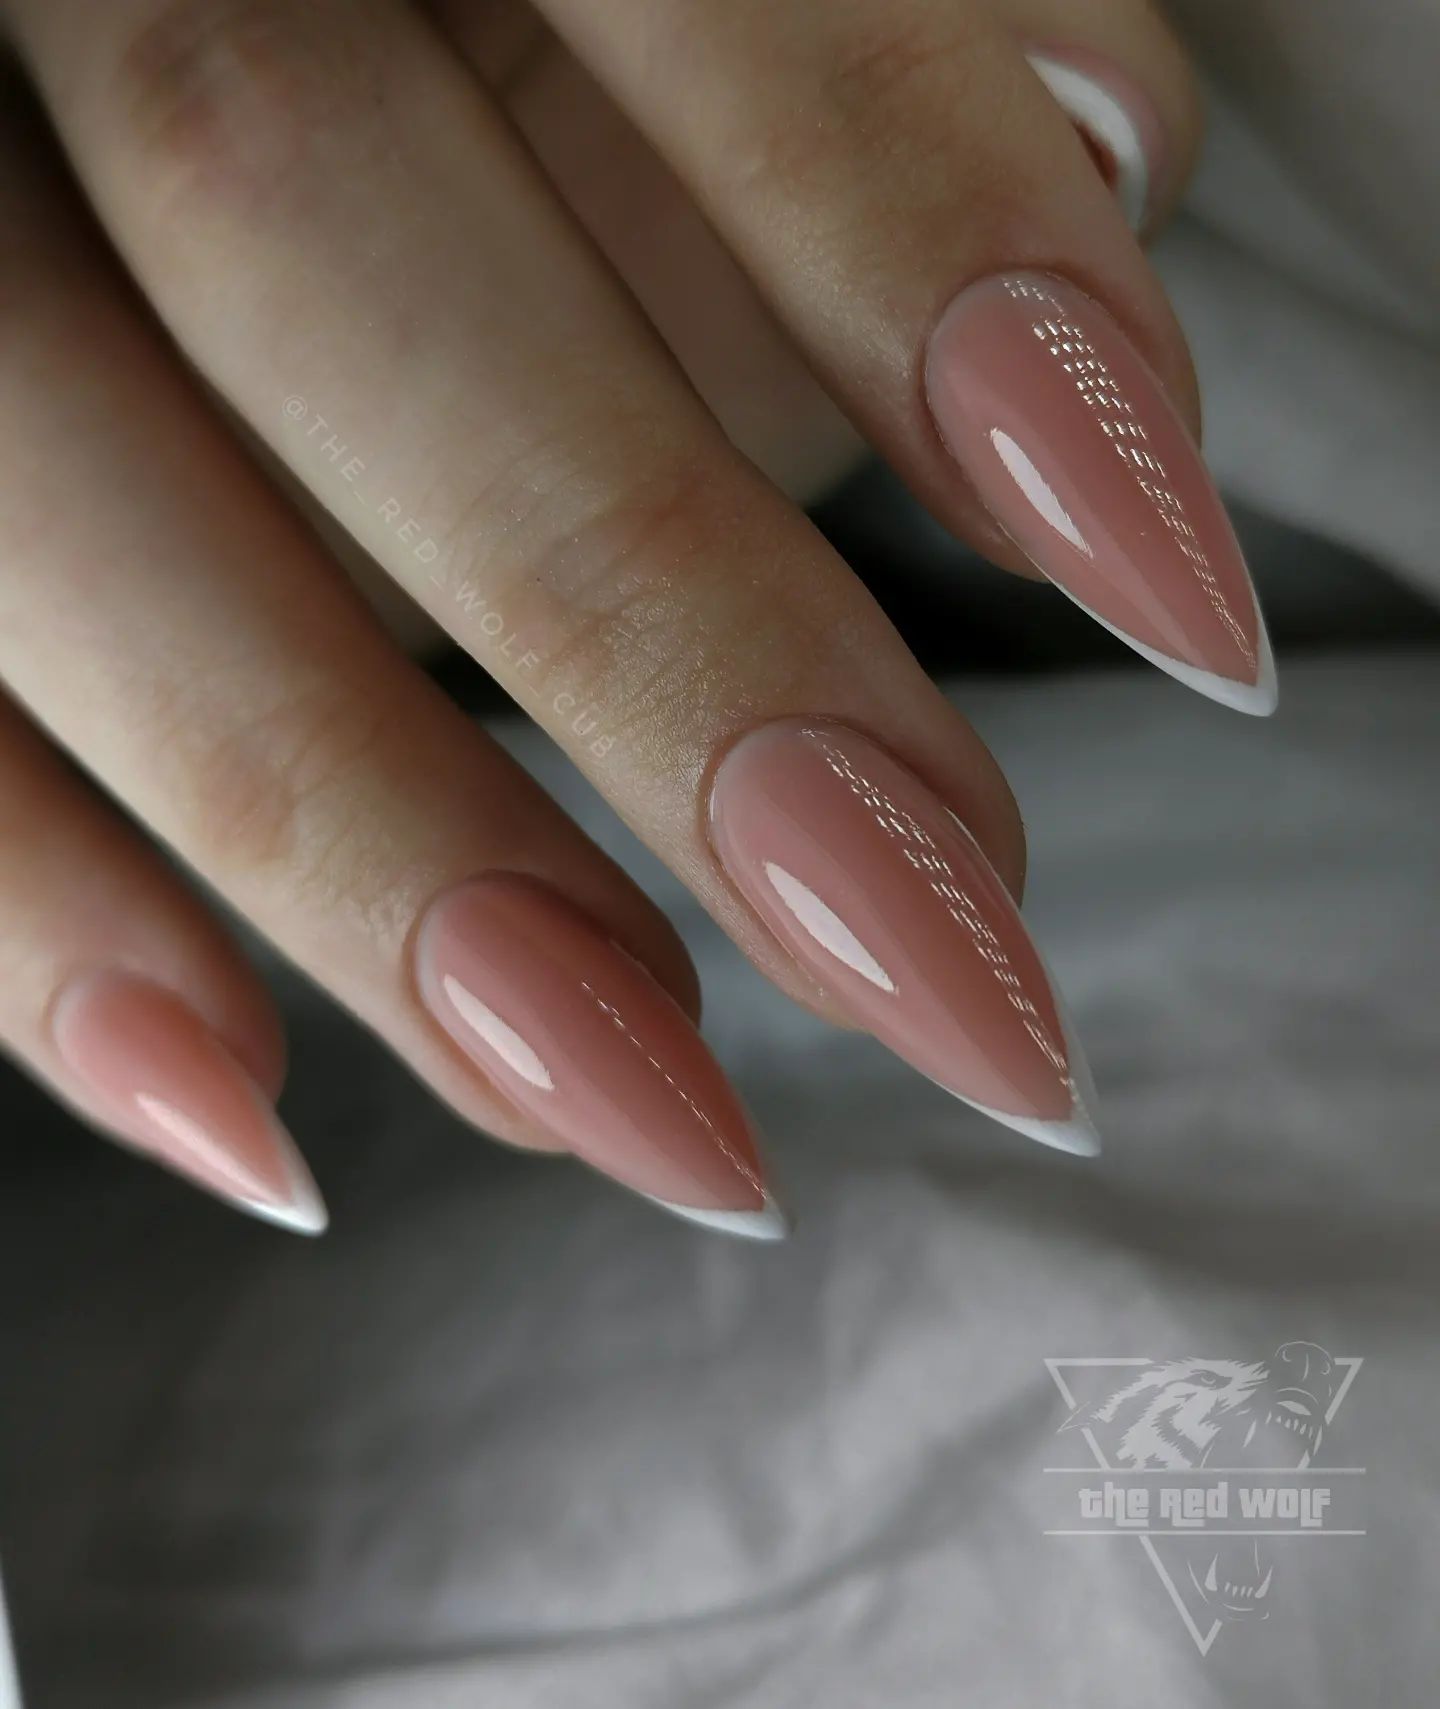 Stiletto nails have a sharp edge but that doesn't mean that they are not suitable for a French mani. Get your fresh mani and feel the purity and simplicity on your day.